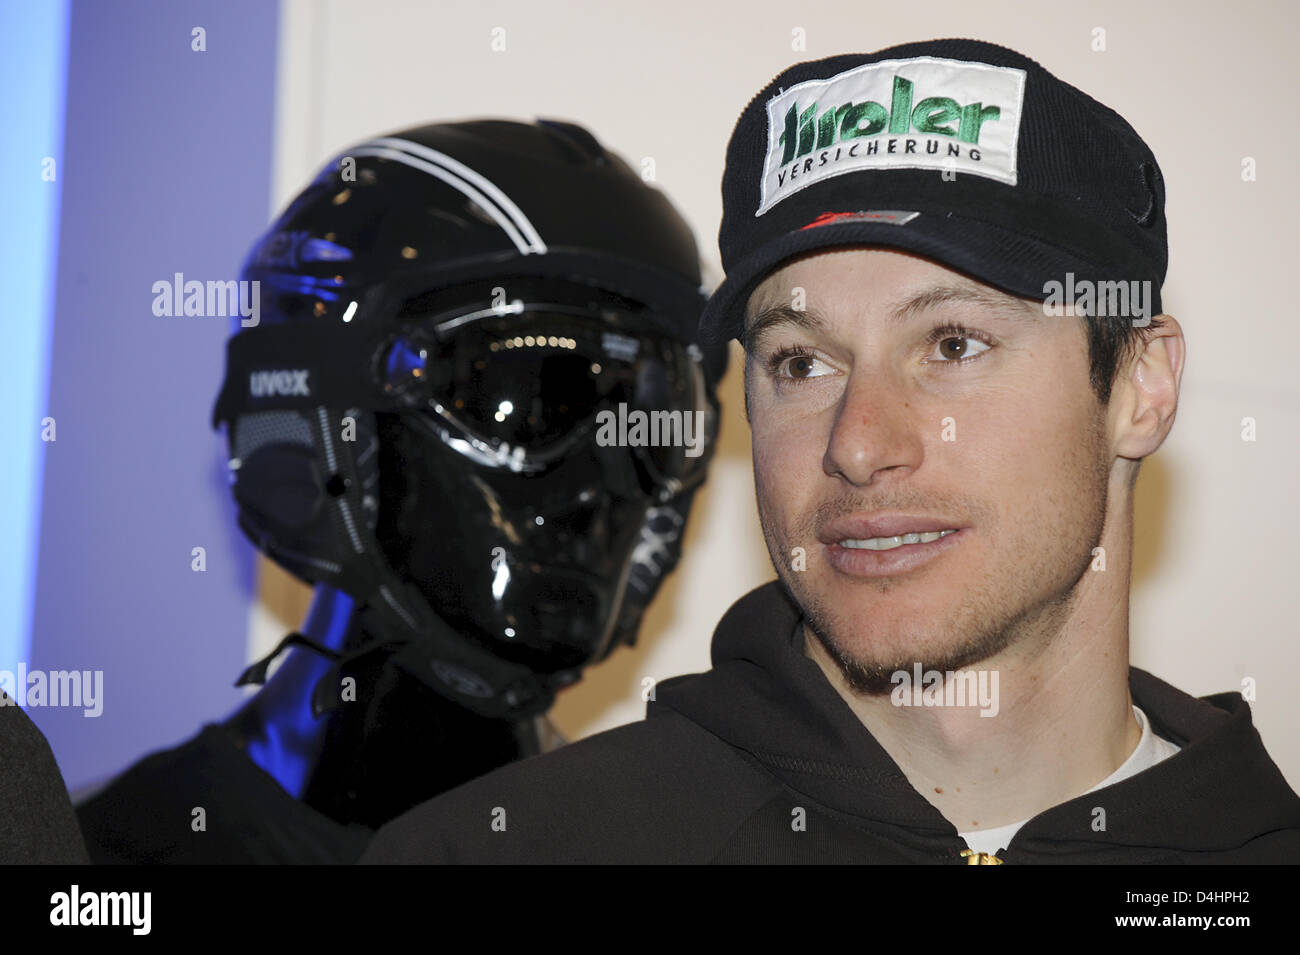 Austrian skier Manfred Pranger poses with a helmet of UVEX at the company?s trade fair stand to the sports articles trade fair ISPO in Munich, Germany, 02 February 2009. Photo: Peter Kneffel Stock Photo